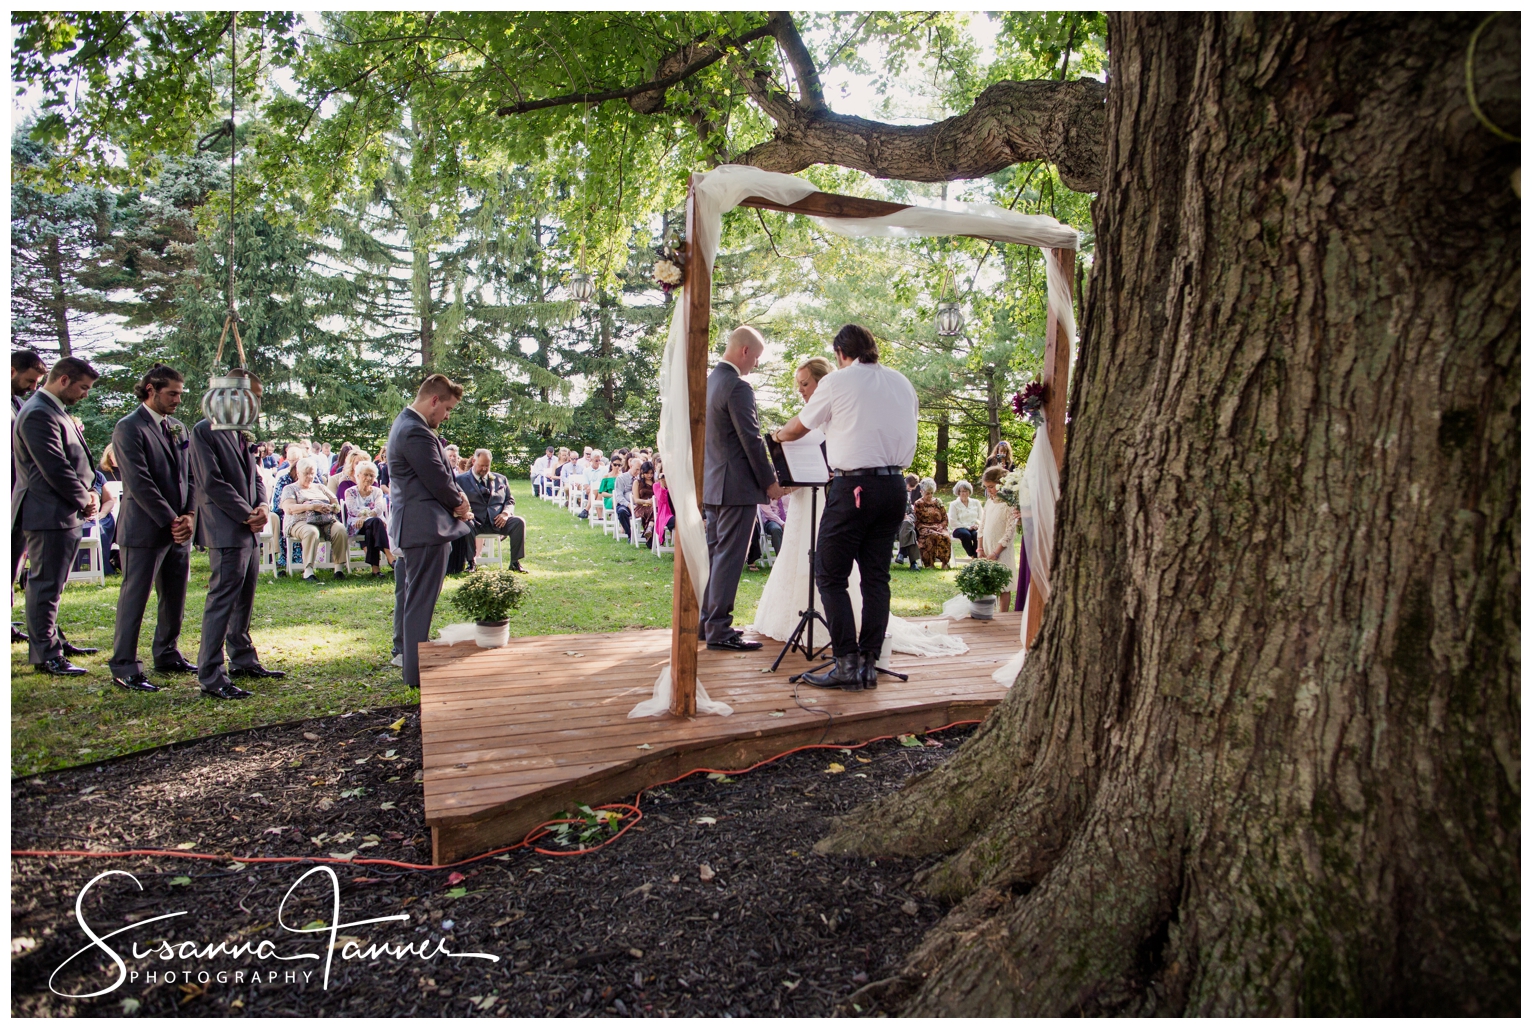 Indianapolis Outdoor Wedding, bride and groom saying vows with large tree trunk in foreground